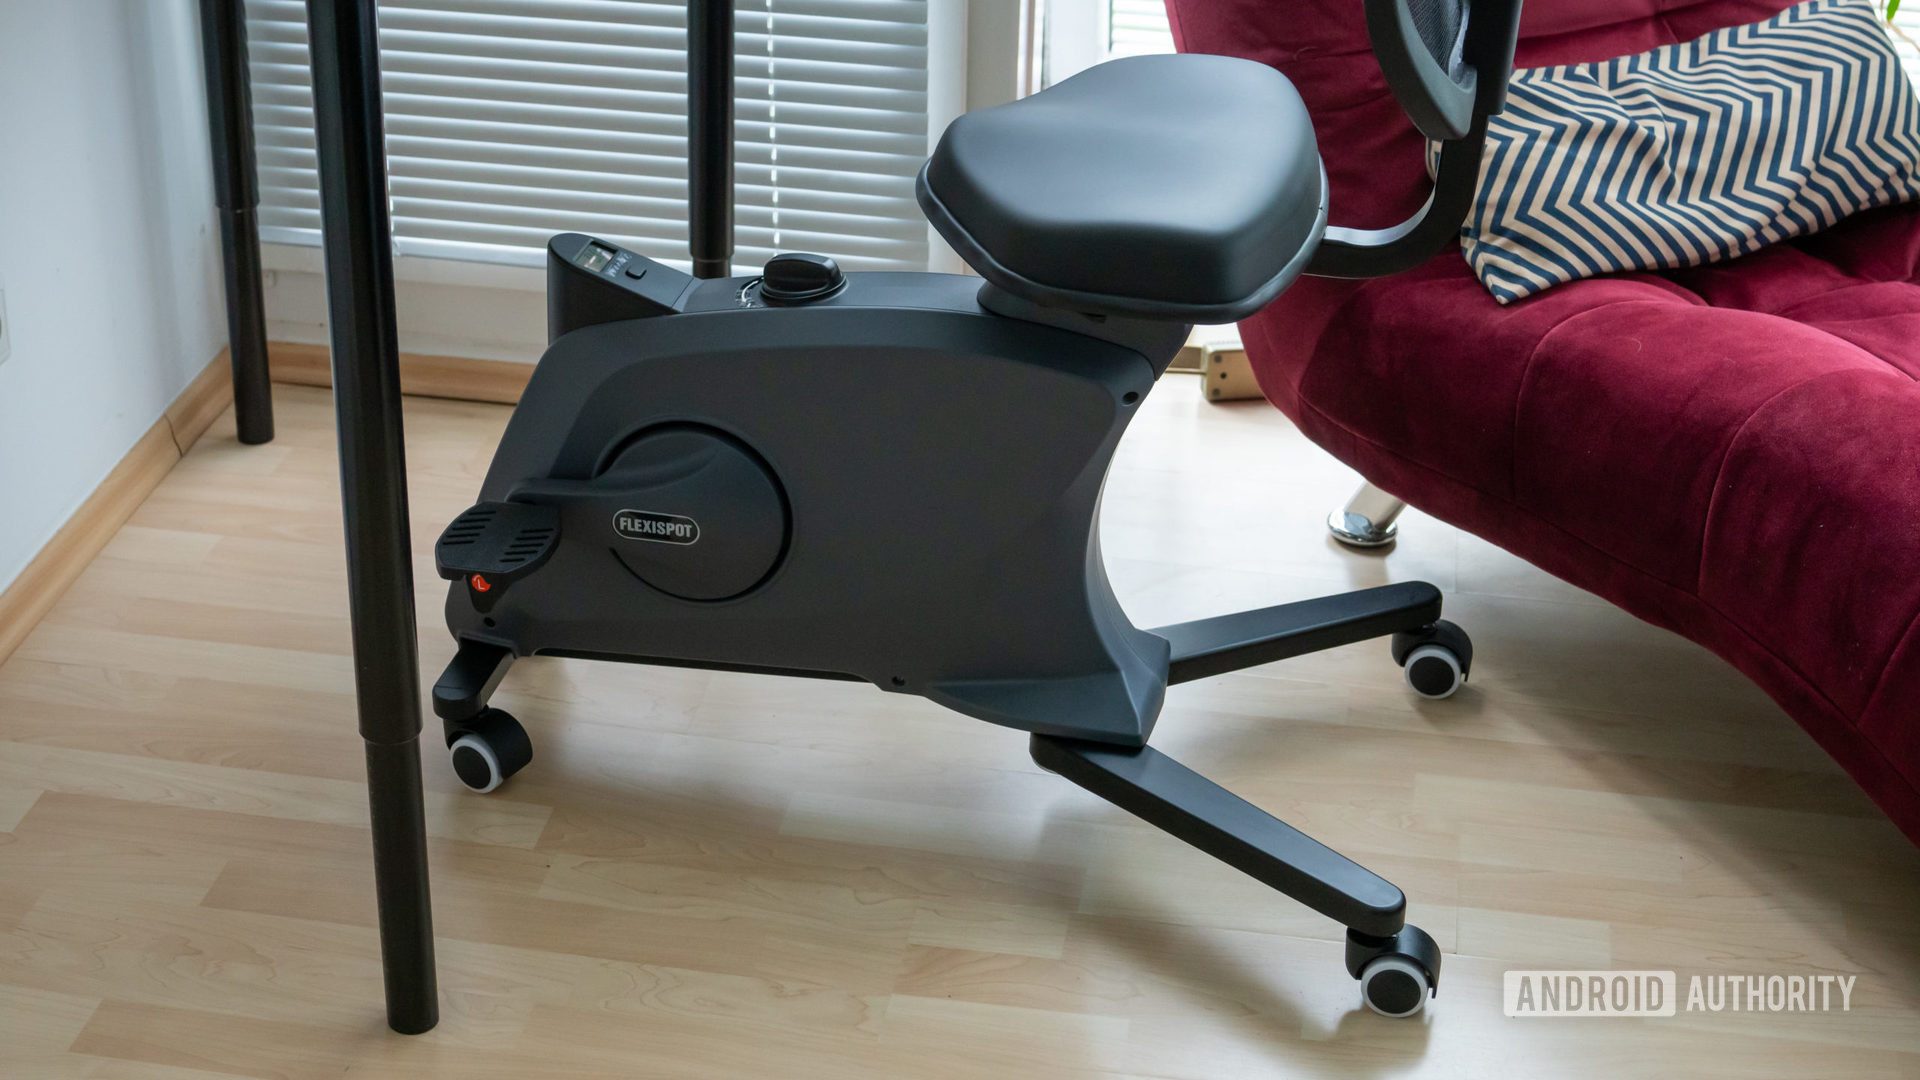 Flexispot Sit2Go Pro fitness chair desk cycle side view low seat